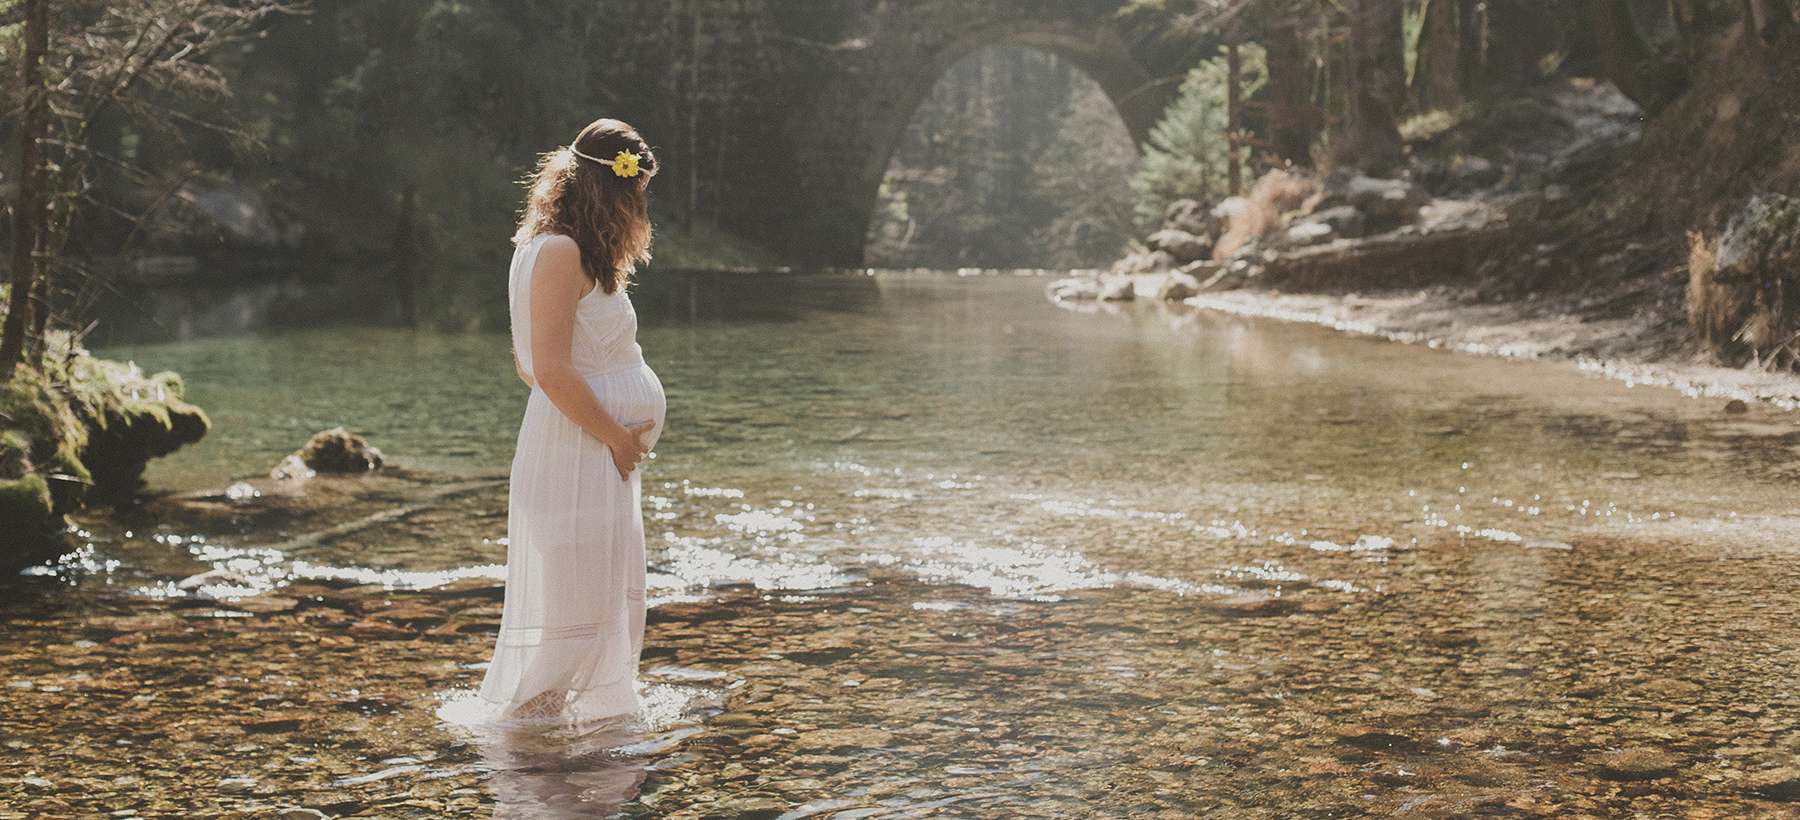 Photographing pregnant woman in nature.